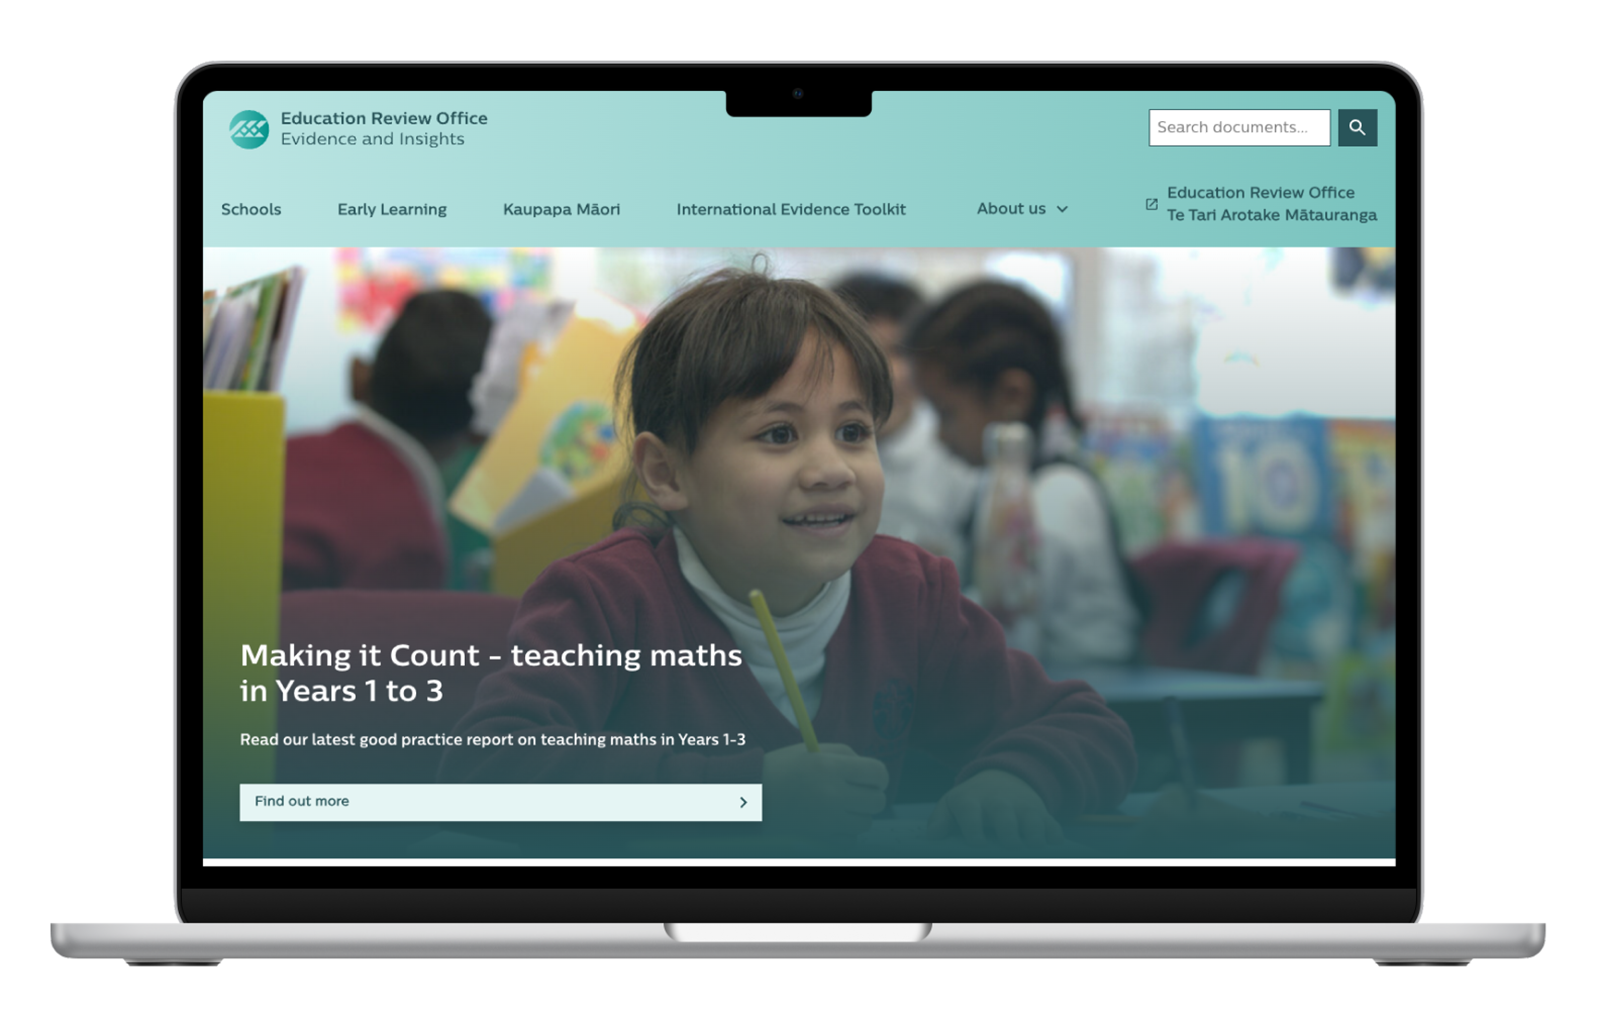 The Education Review Office Evidence and Insights landing page